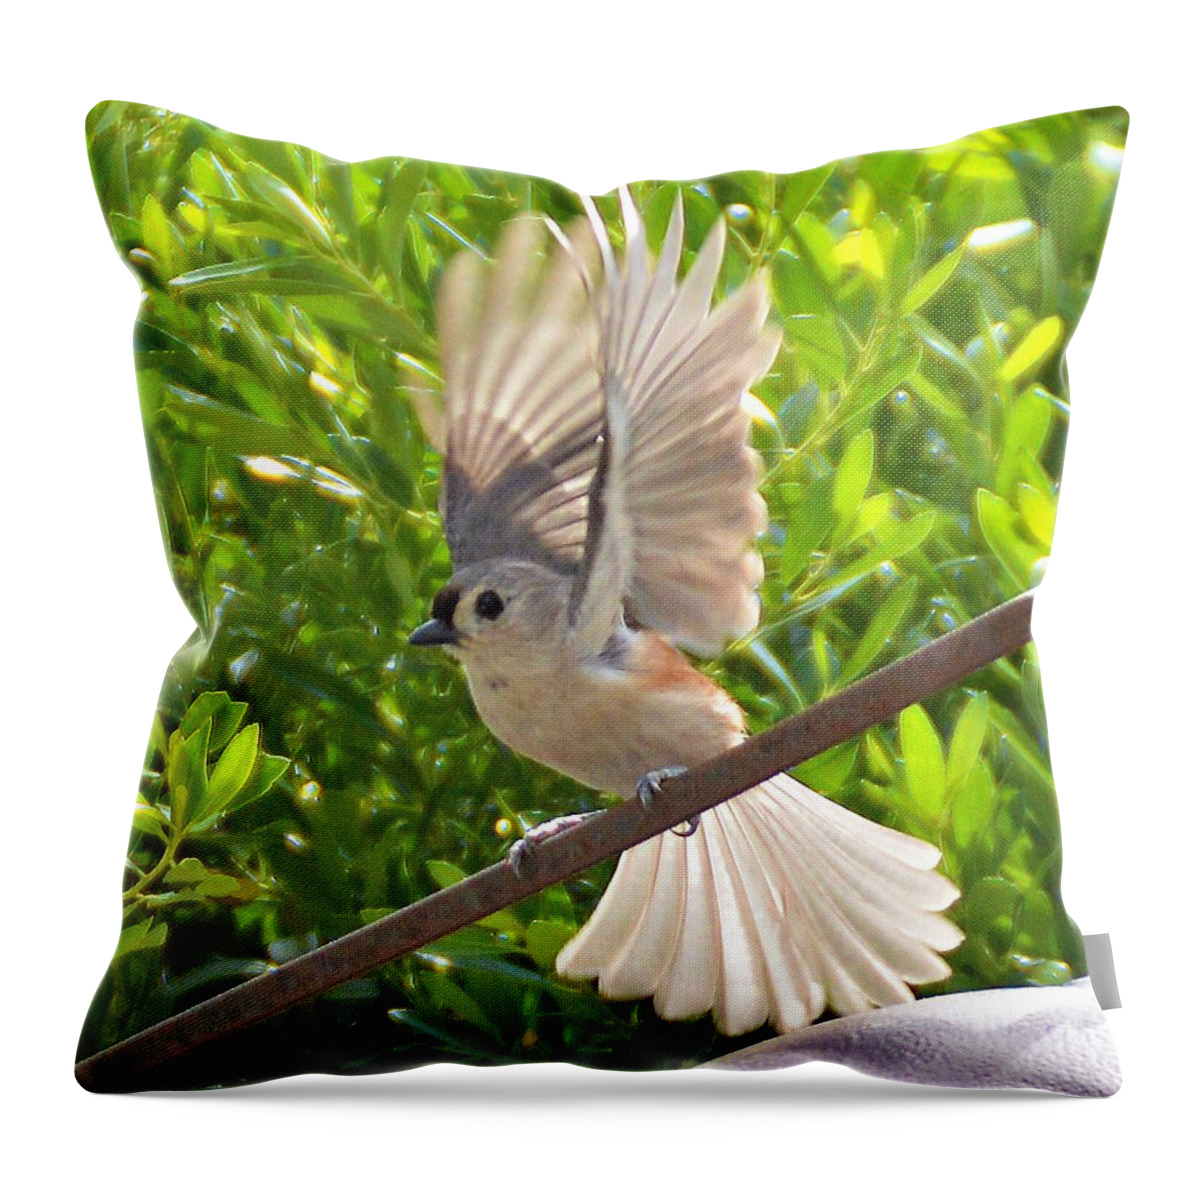 Tufted Titmouse Throw Pillow featuring the photograph Titmouse Takeoff by Kathy Kelly